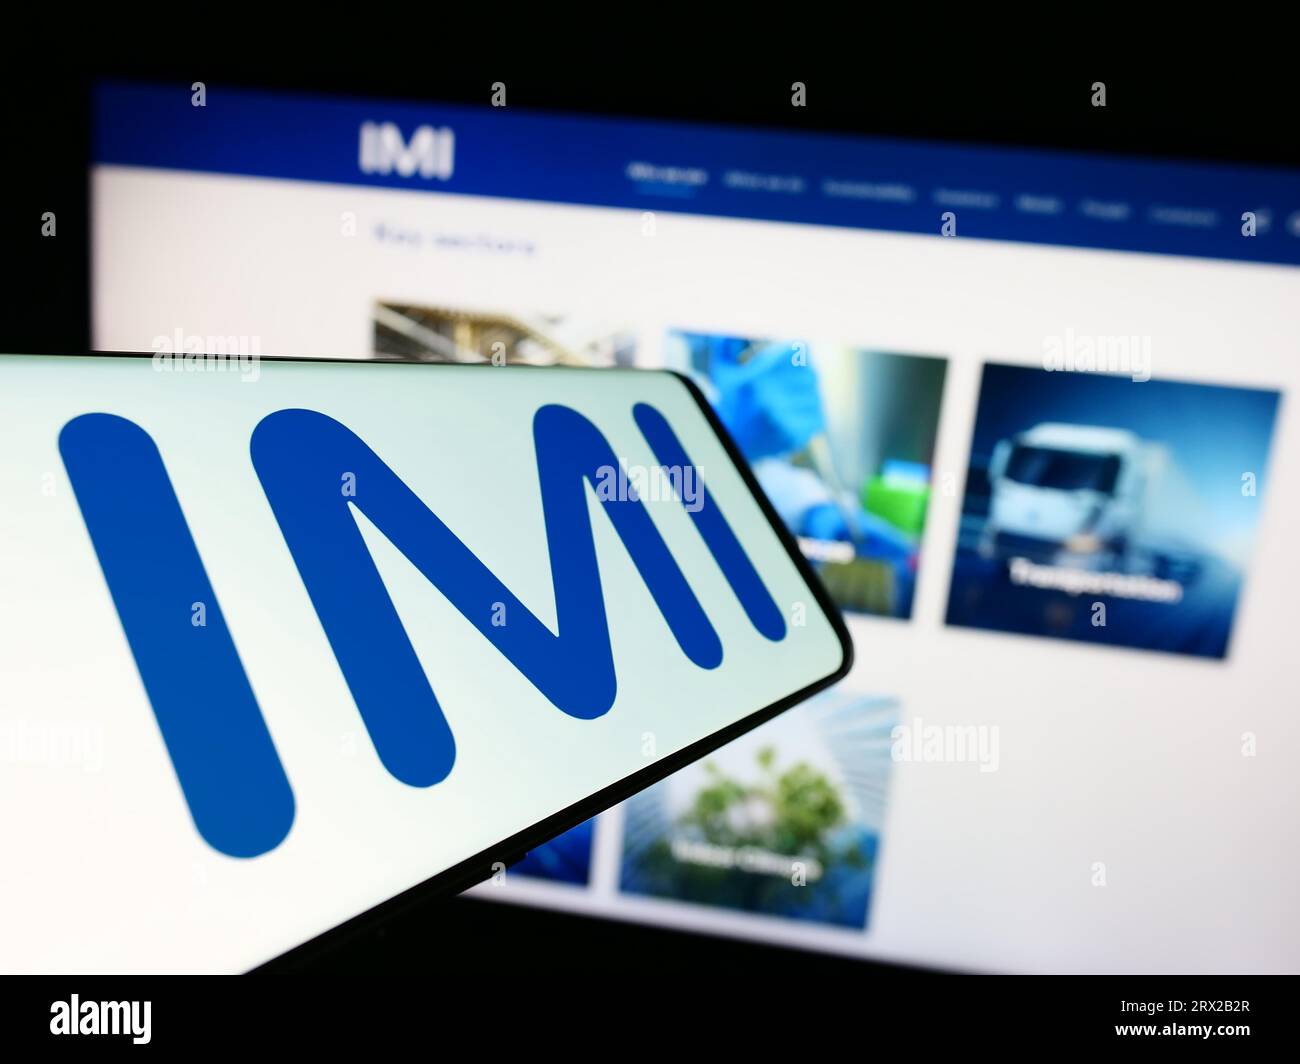 Cellphone with logo of British engineering company IMI plc on screen in front of business website. Focus on center of phone display. Stock Photo